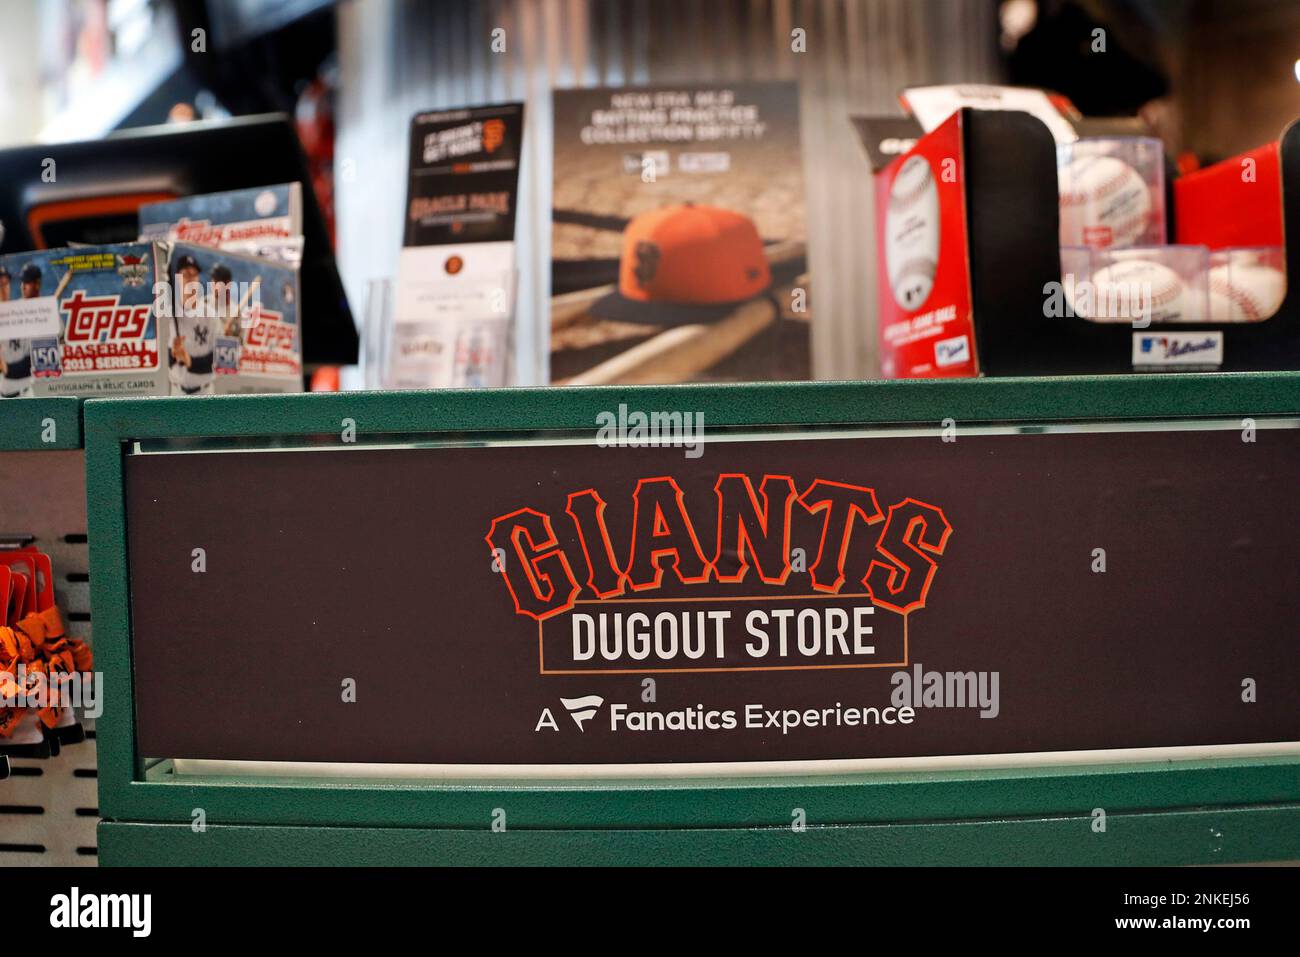 San Francisco Giants' Dugout Store at Oracle Park in San Francisco